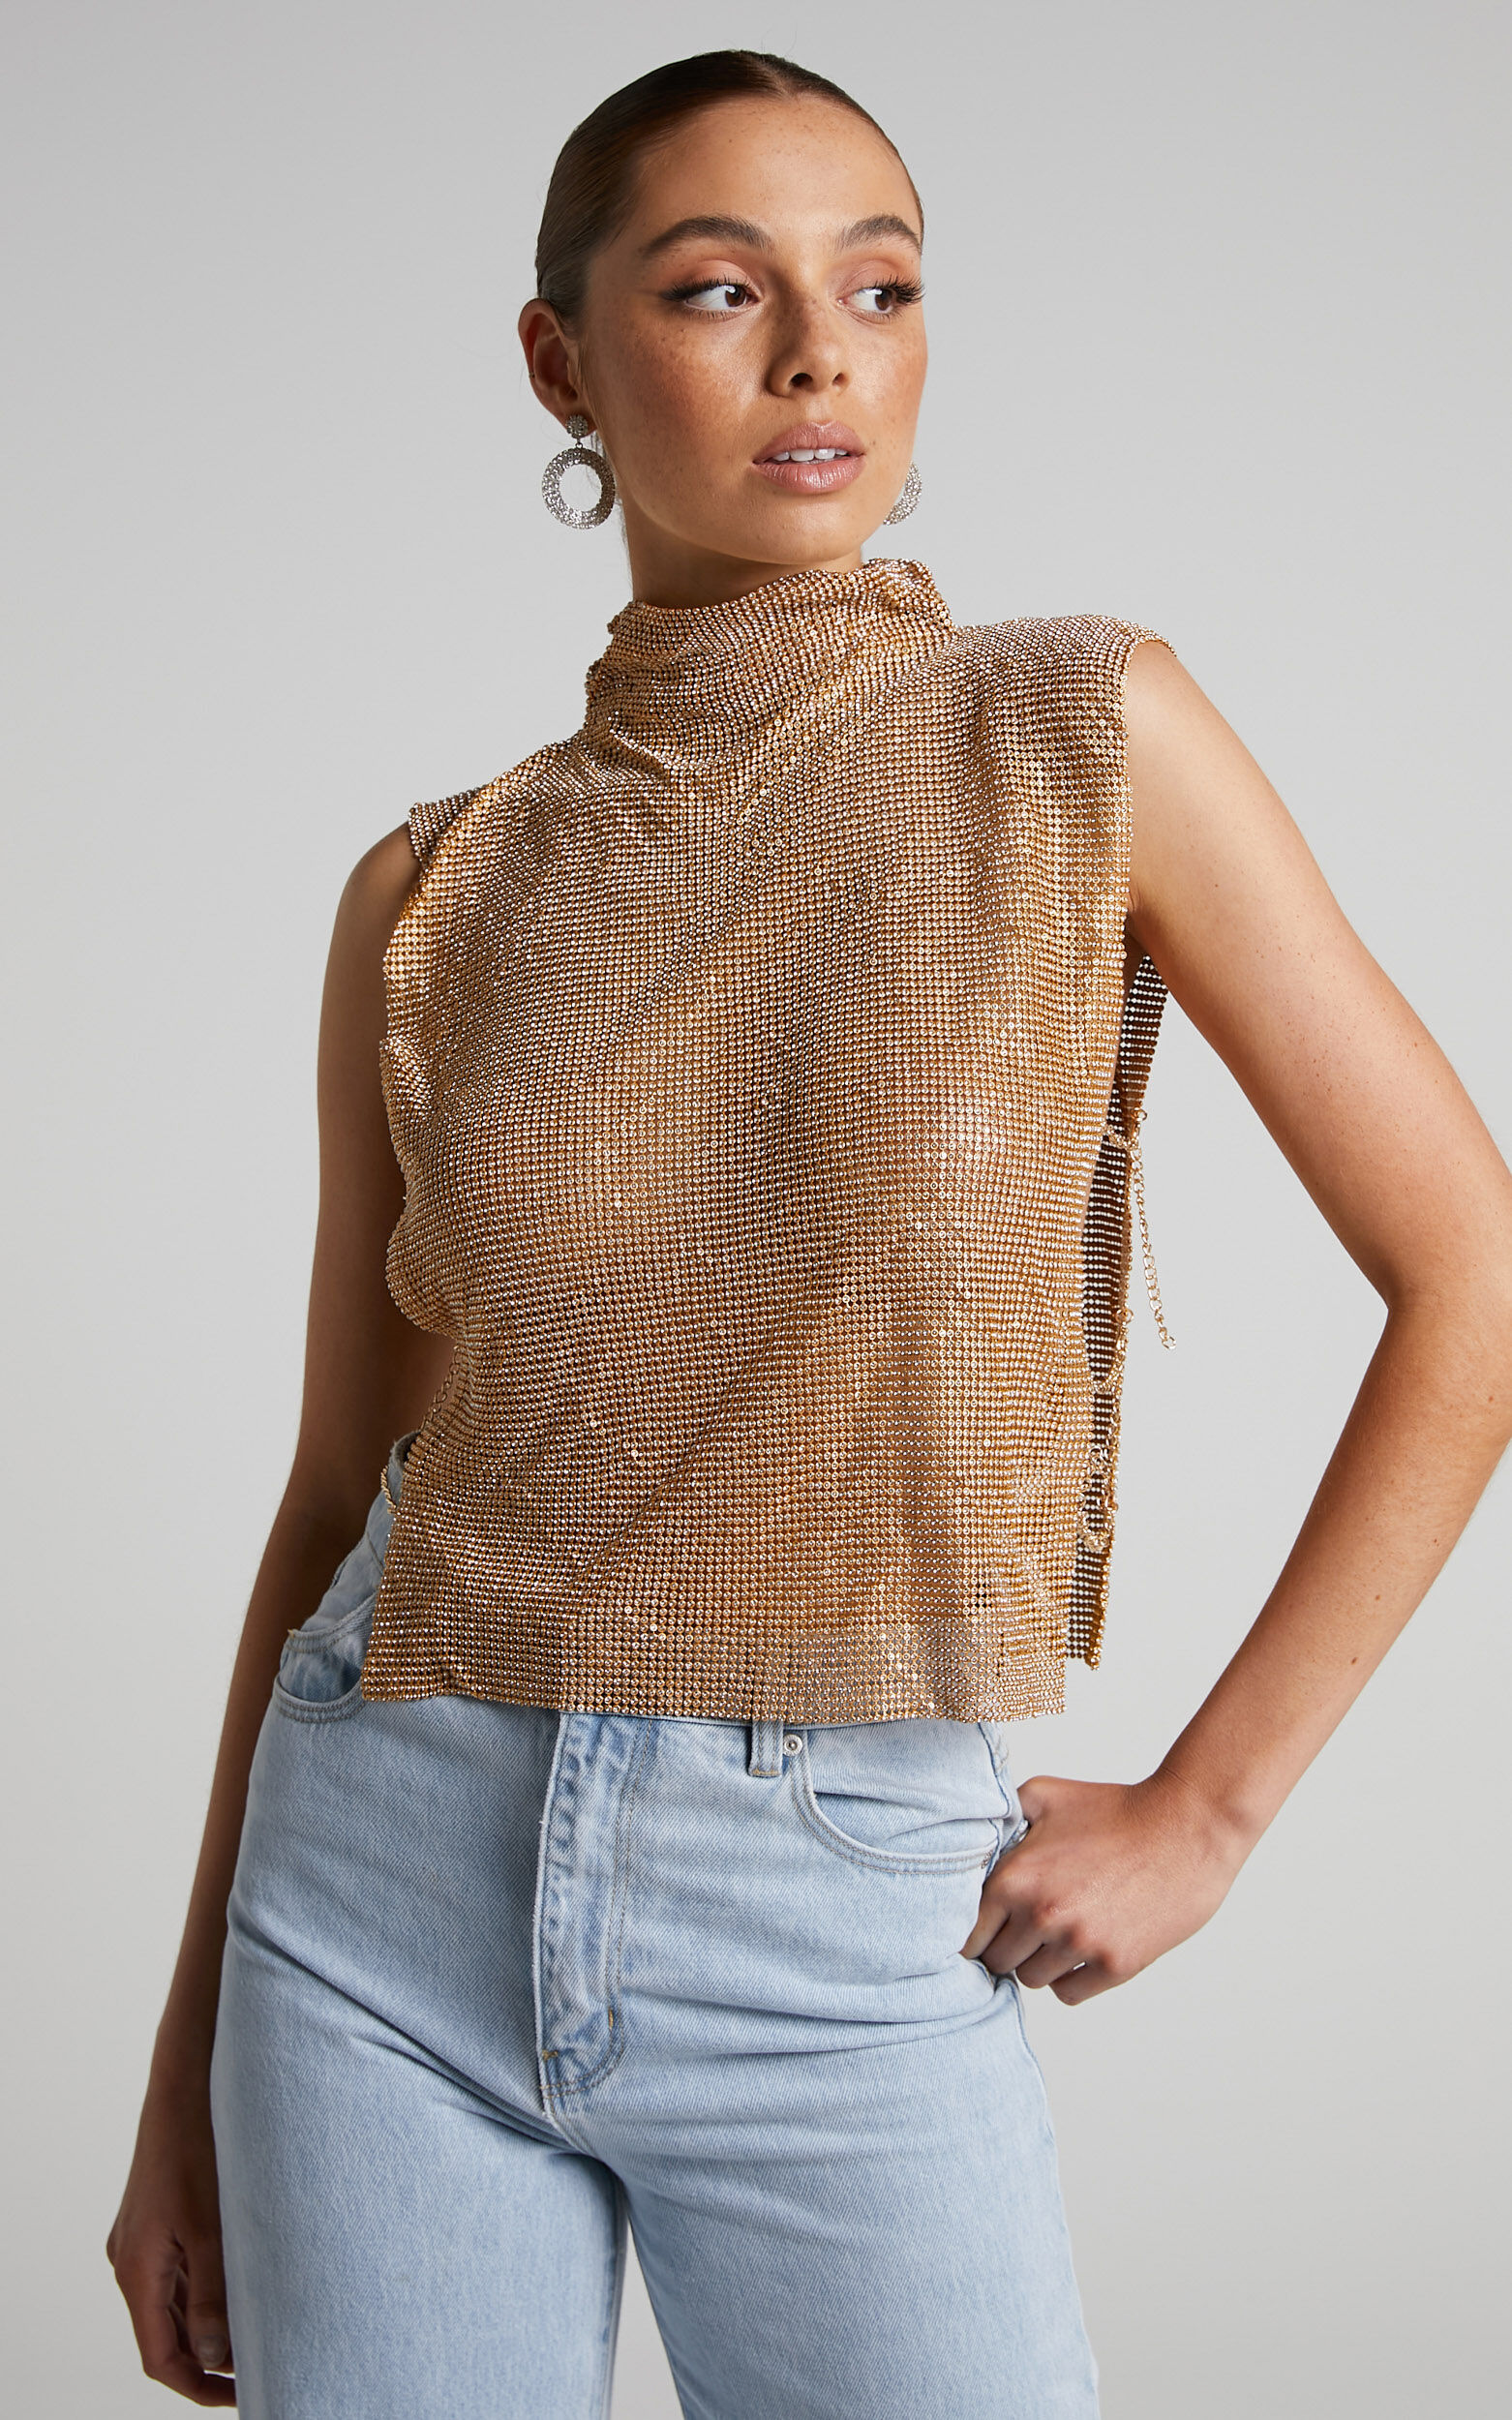 Dalena Top - Sleeveless High Neck Mesh Chainmail Top in Gold - L, GLD1, super-hi-res image number null